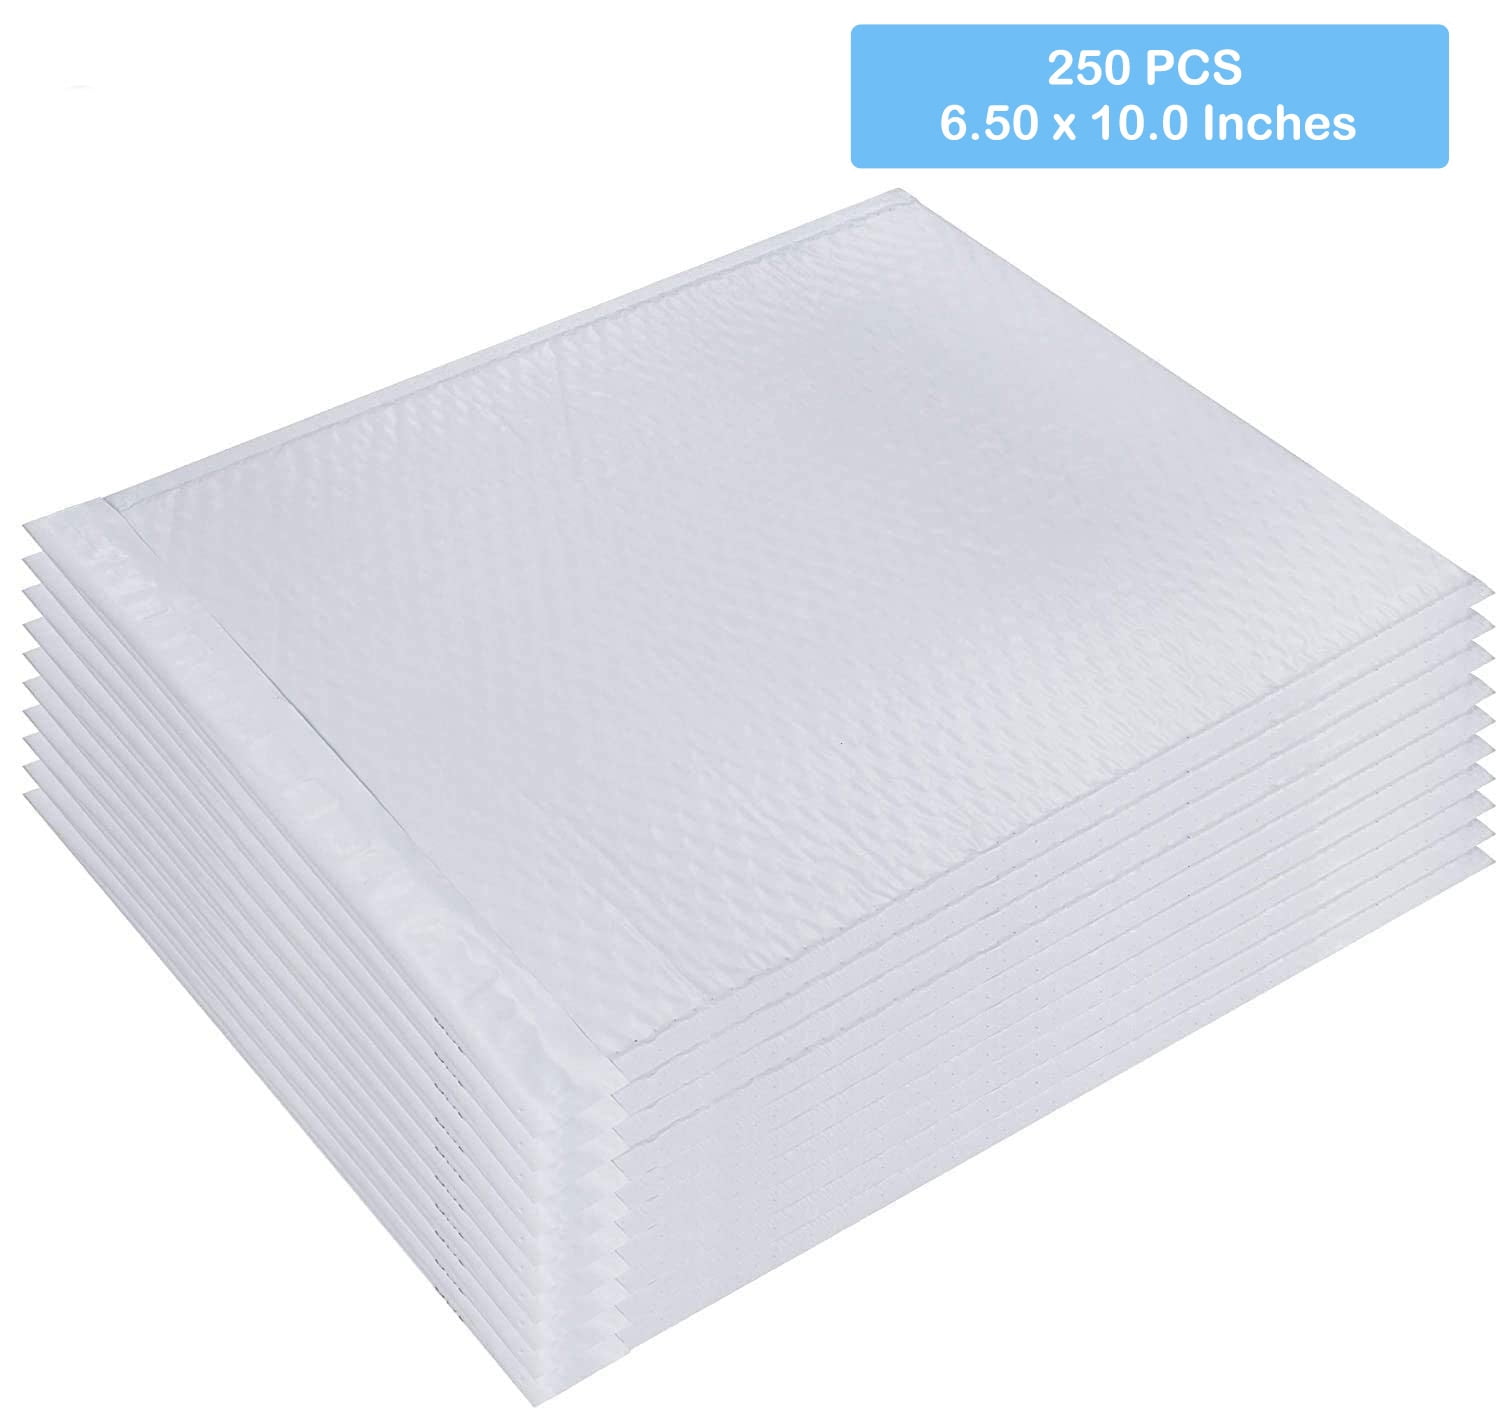 LOT OF 10 Extra Large 30"x20" Padded Bubble Shipping Mailers Self Adhesive 